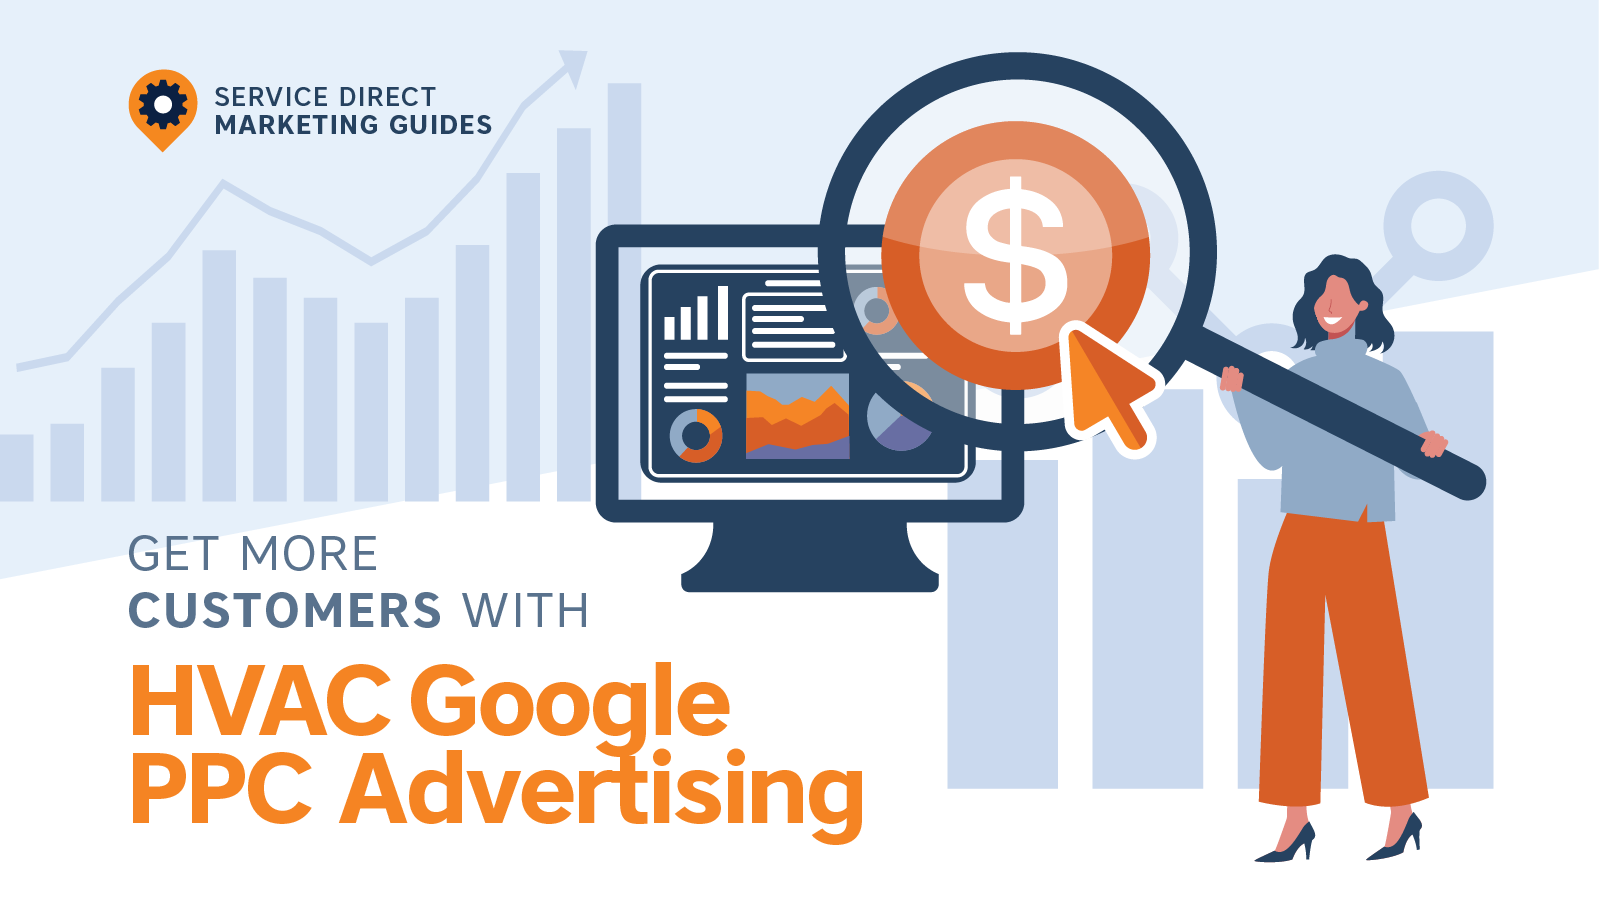 How to Get More Customers with Google PPC Ads for Your HVAC Business